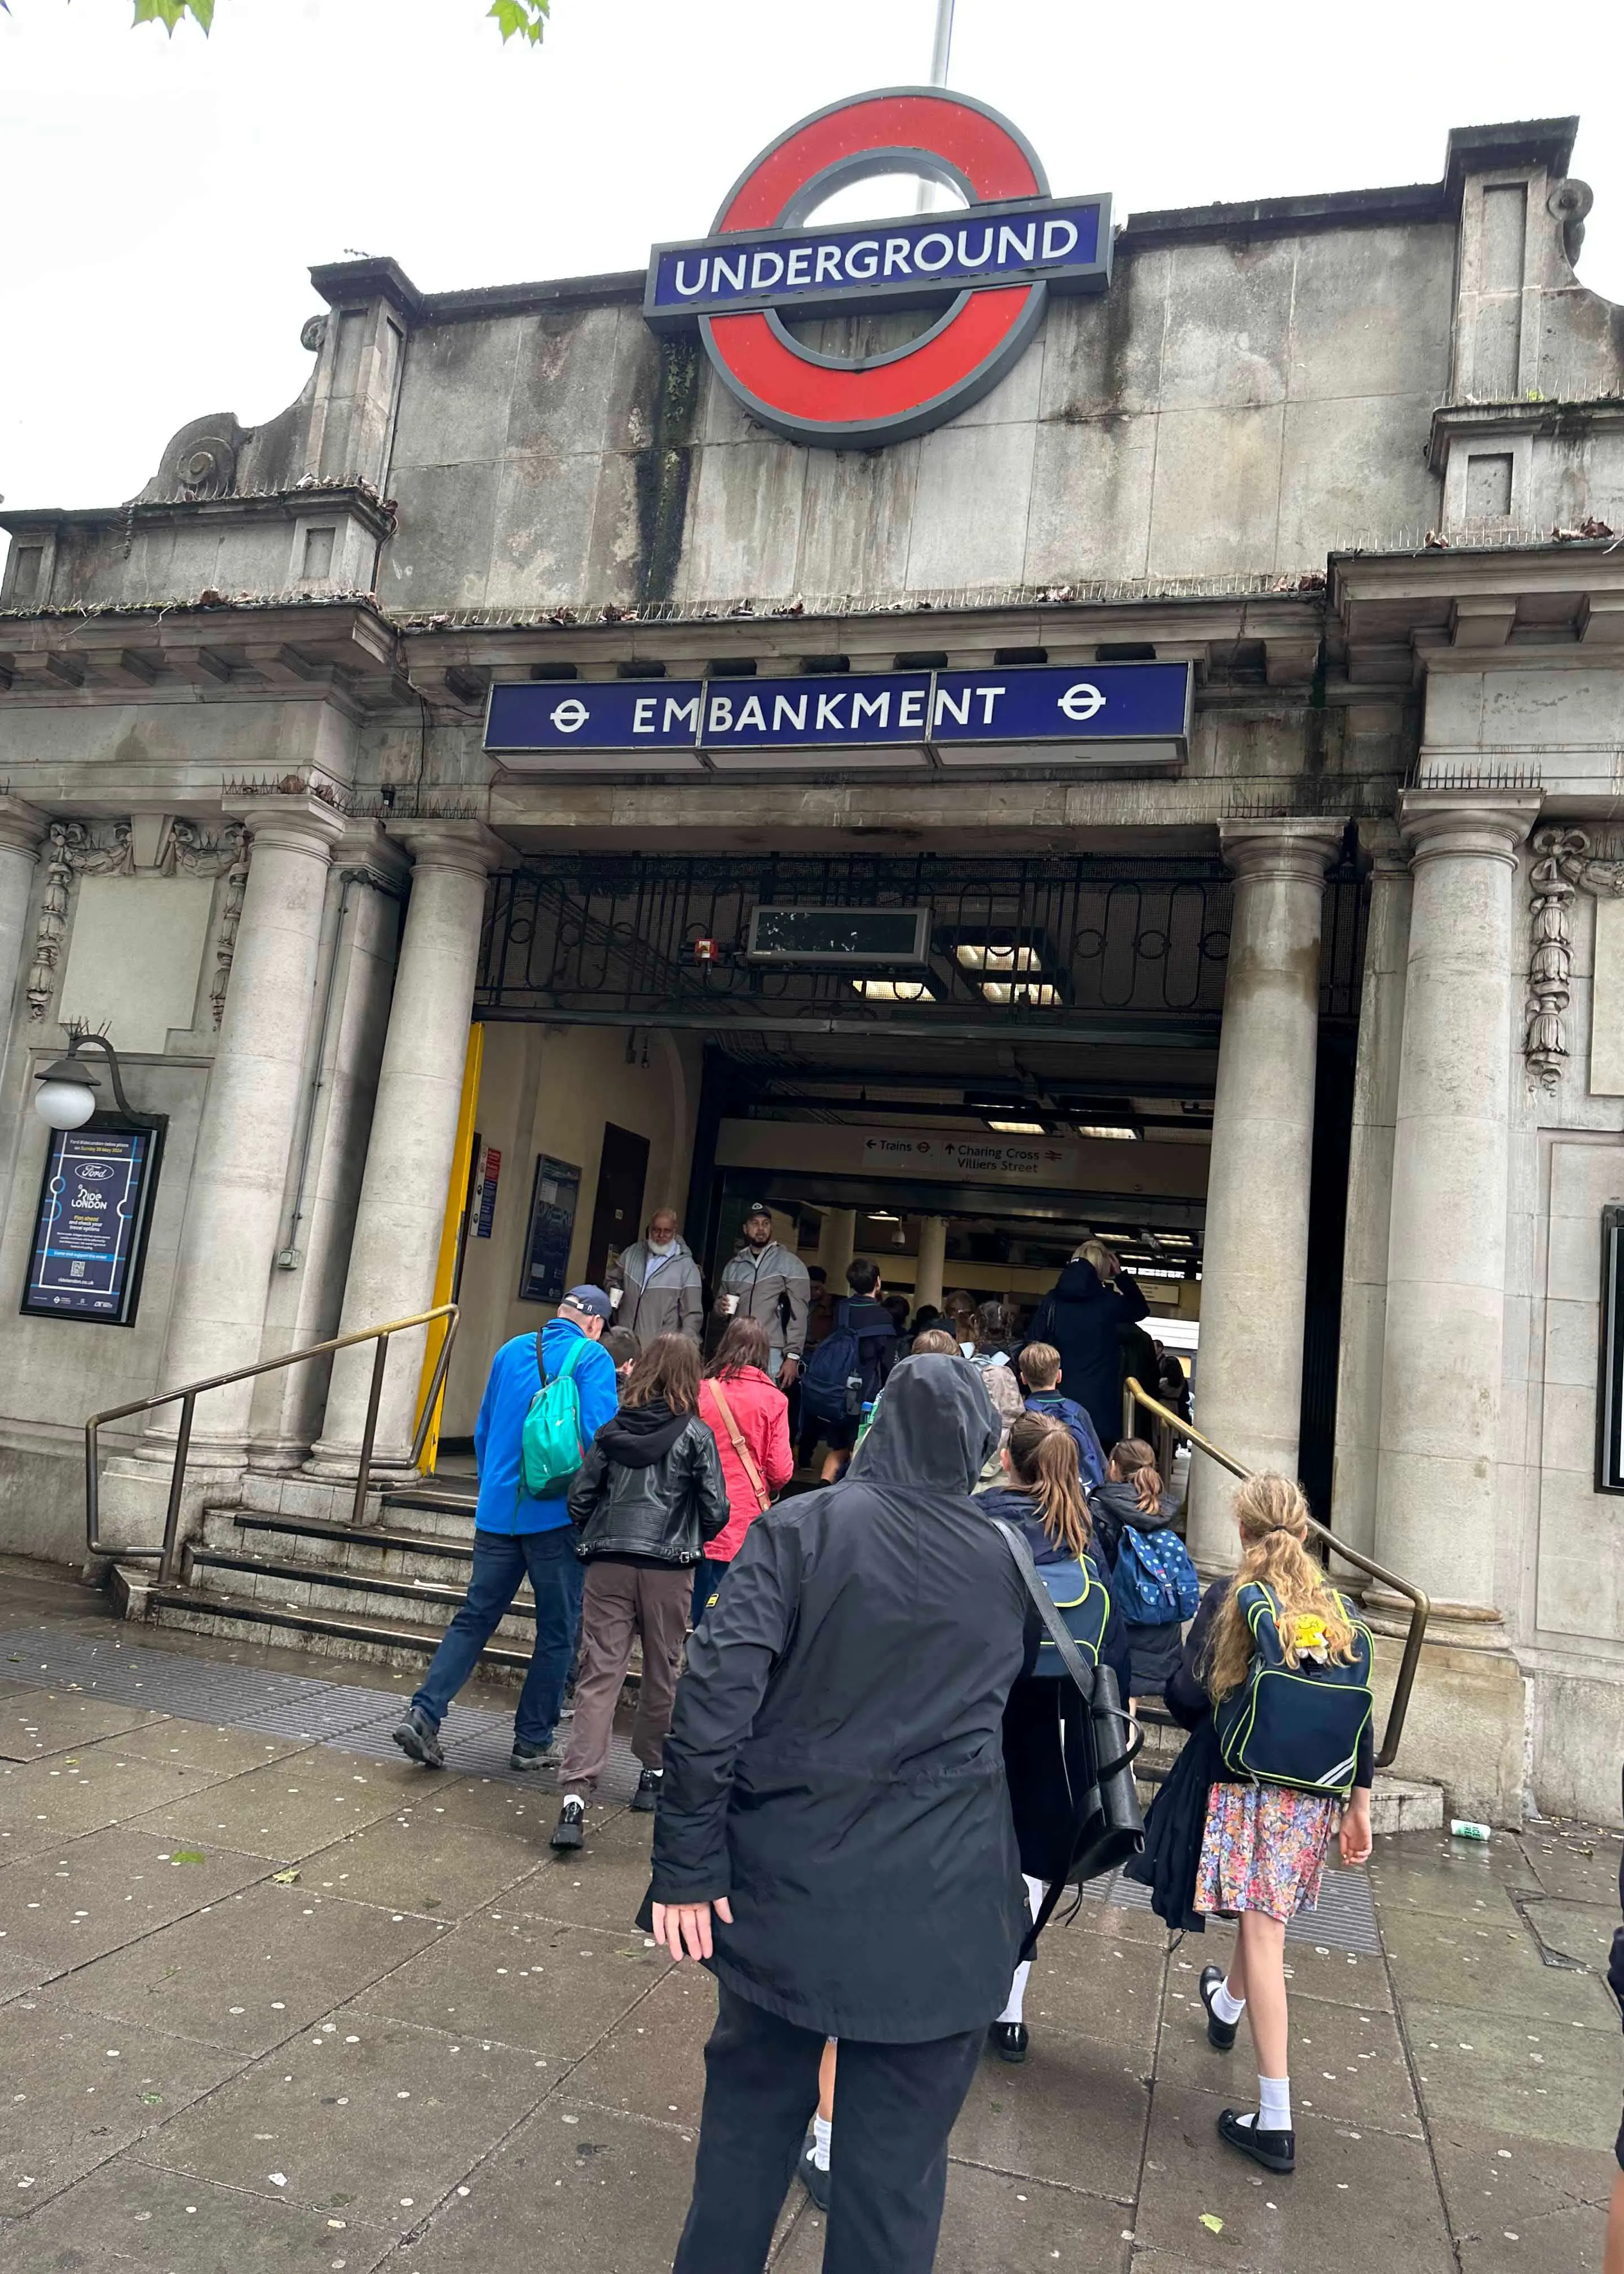 Prep 4 pupils entering embankment tube station | Ibstock Place School, a private school near Richmond, Barnes, Putney, Kingston, and Wandsworth on an overseas trip. 